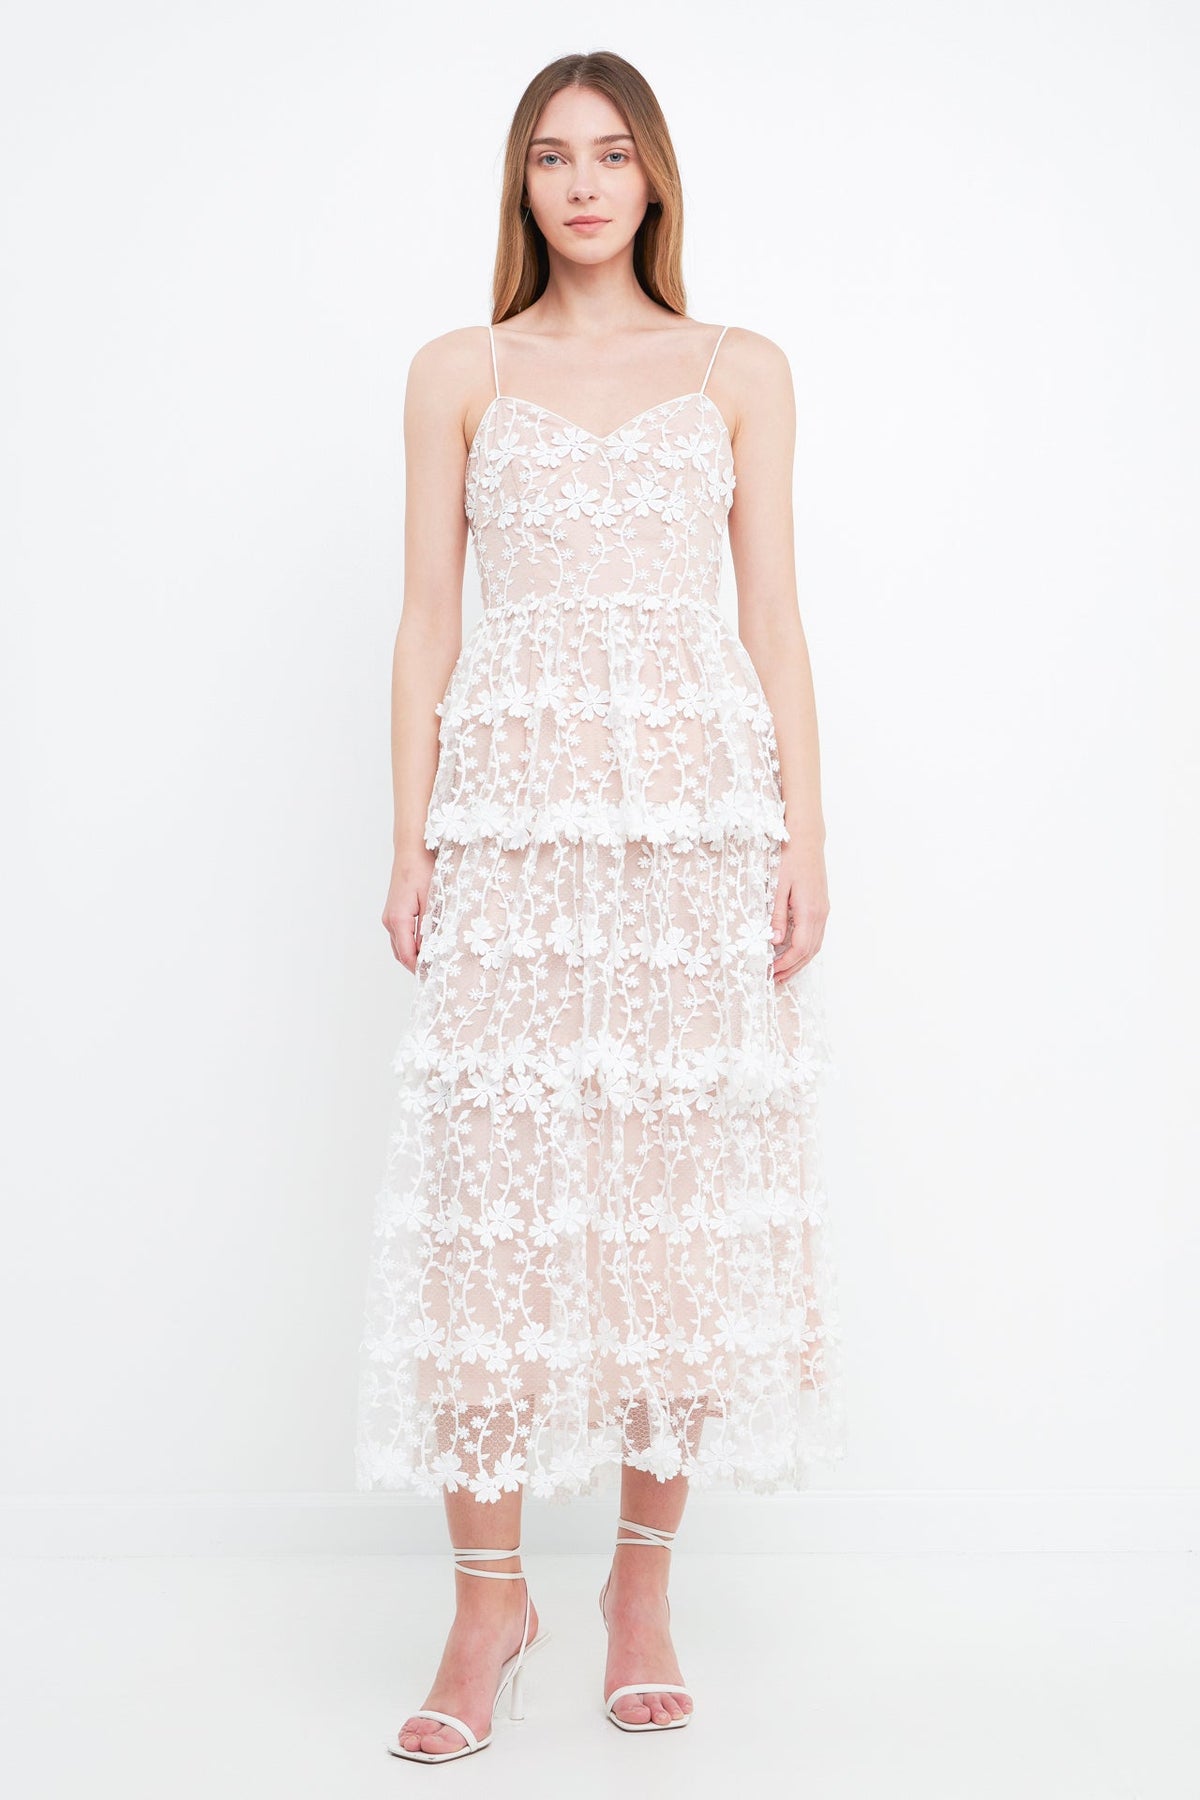 ENDLESS ROSE - Crochet Layered Midi Dress - DRESSES available at Objectrare